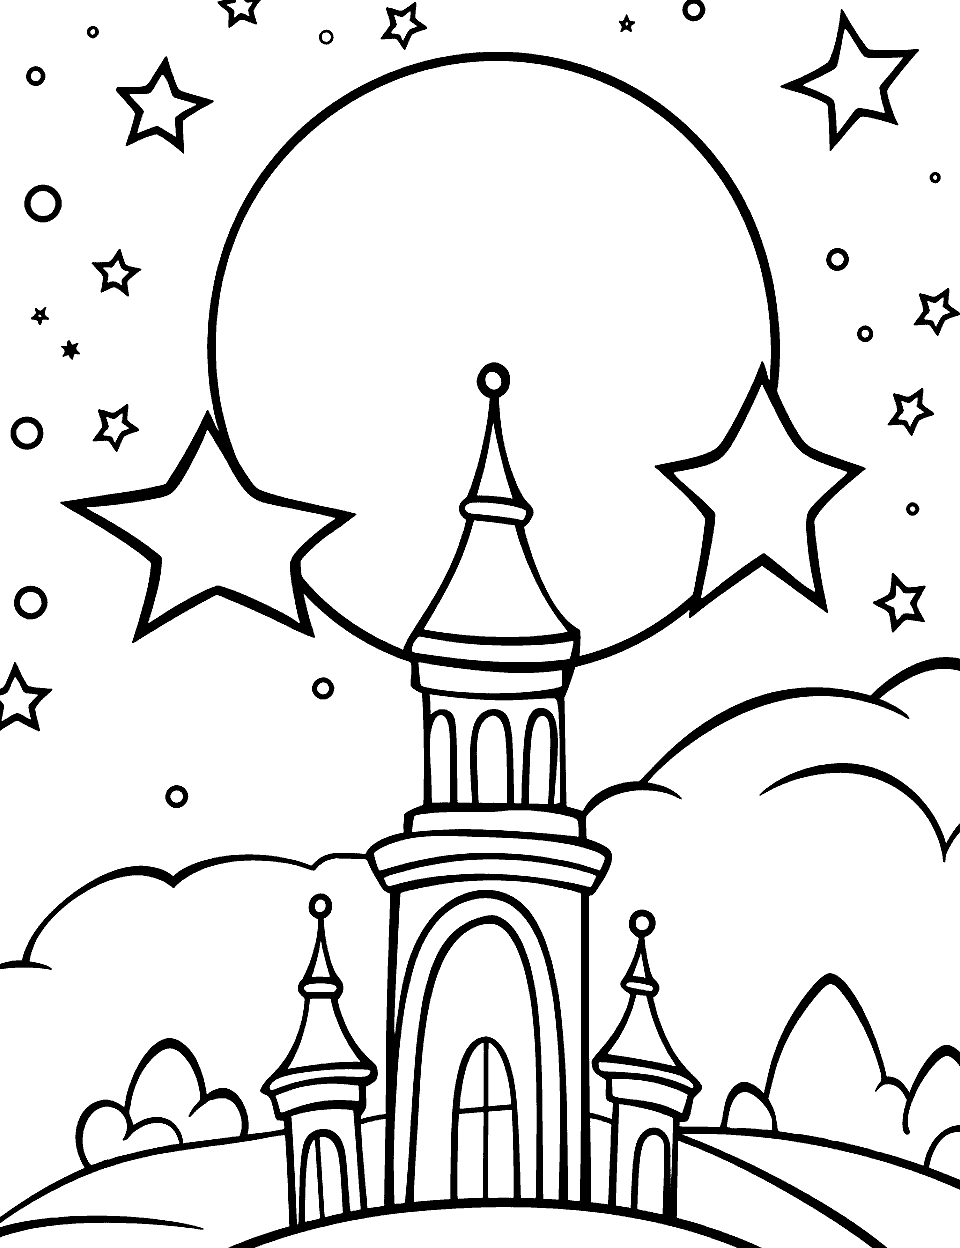 Ramadan Starry Night Star Coloring Page - A mosque under a star-filled sky, symbolizing the holy month of Ramadan.